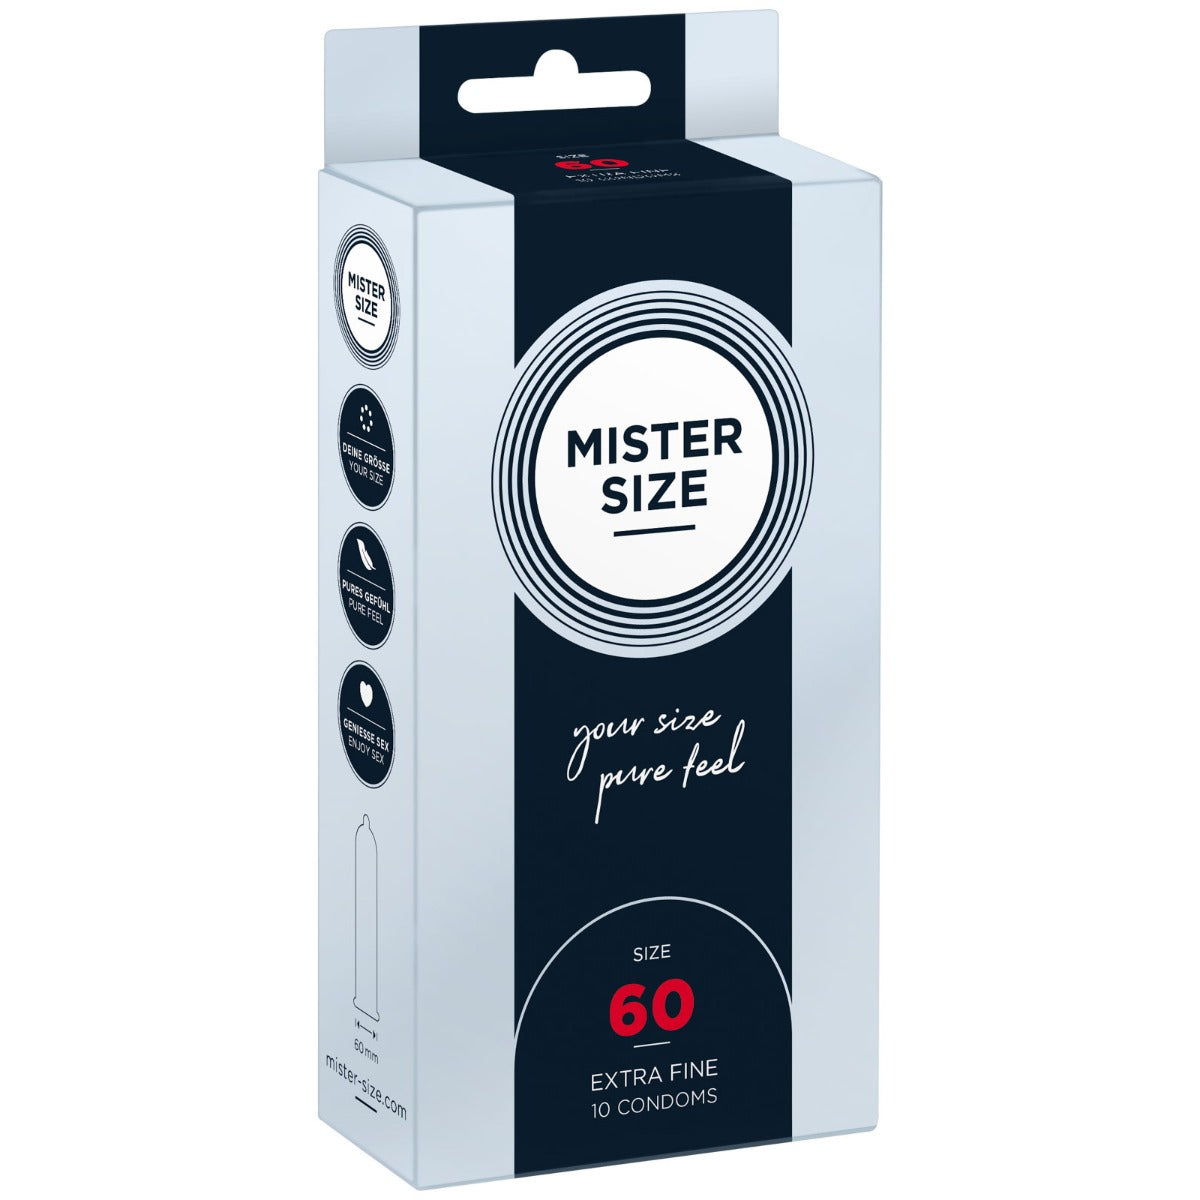 Condoms MISTER SIZE - pure feel Condoms - Size 60 mm (10 pack)   